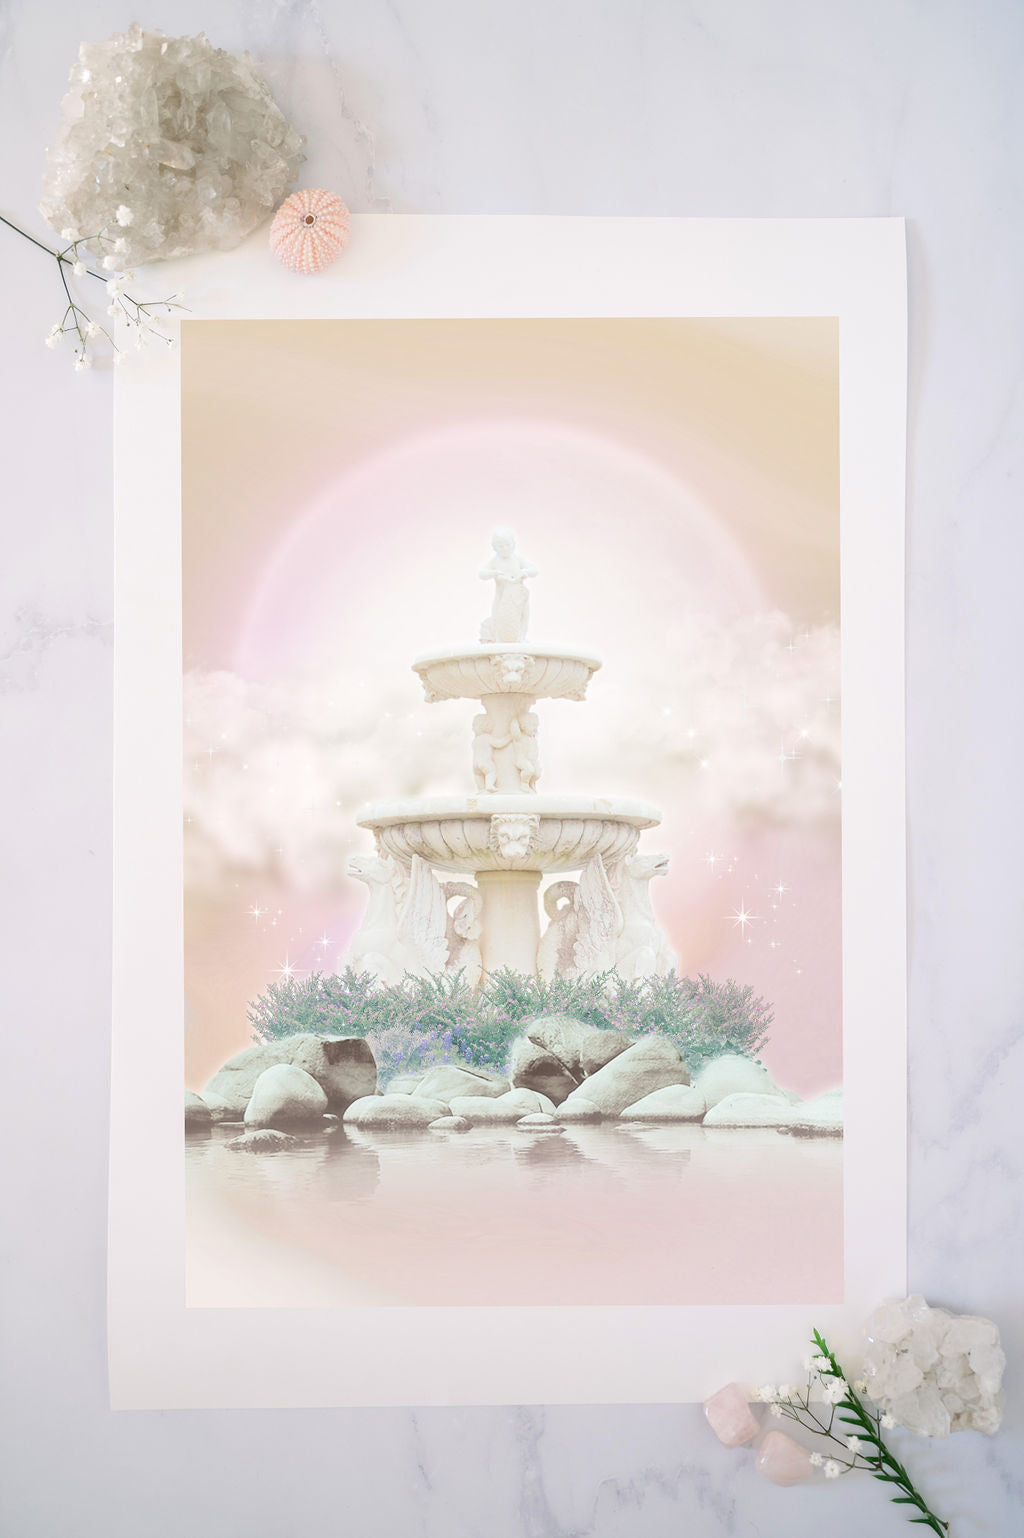 Fountain of Wealth  Open yourself up to the infinite possibilities for money to flow to you in each moment. Hang this fine art print in any space where you’d like to create more positivity and consistent wealth.